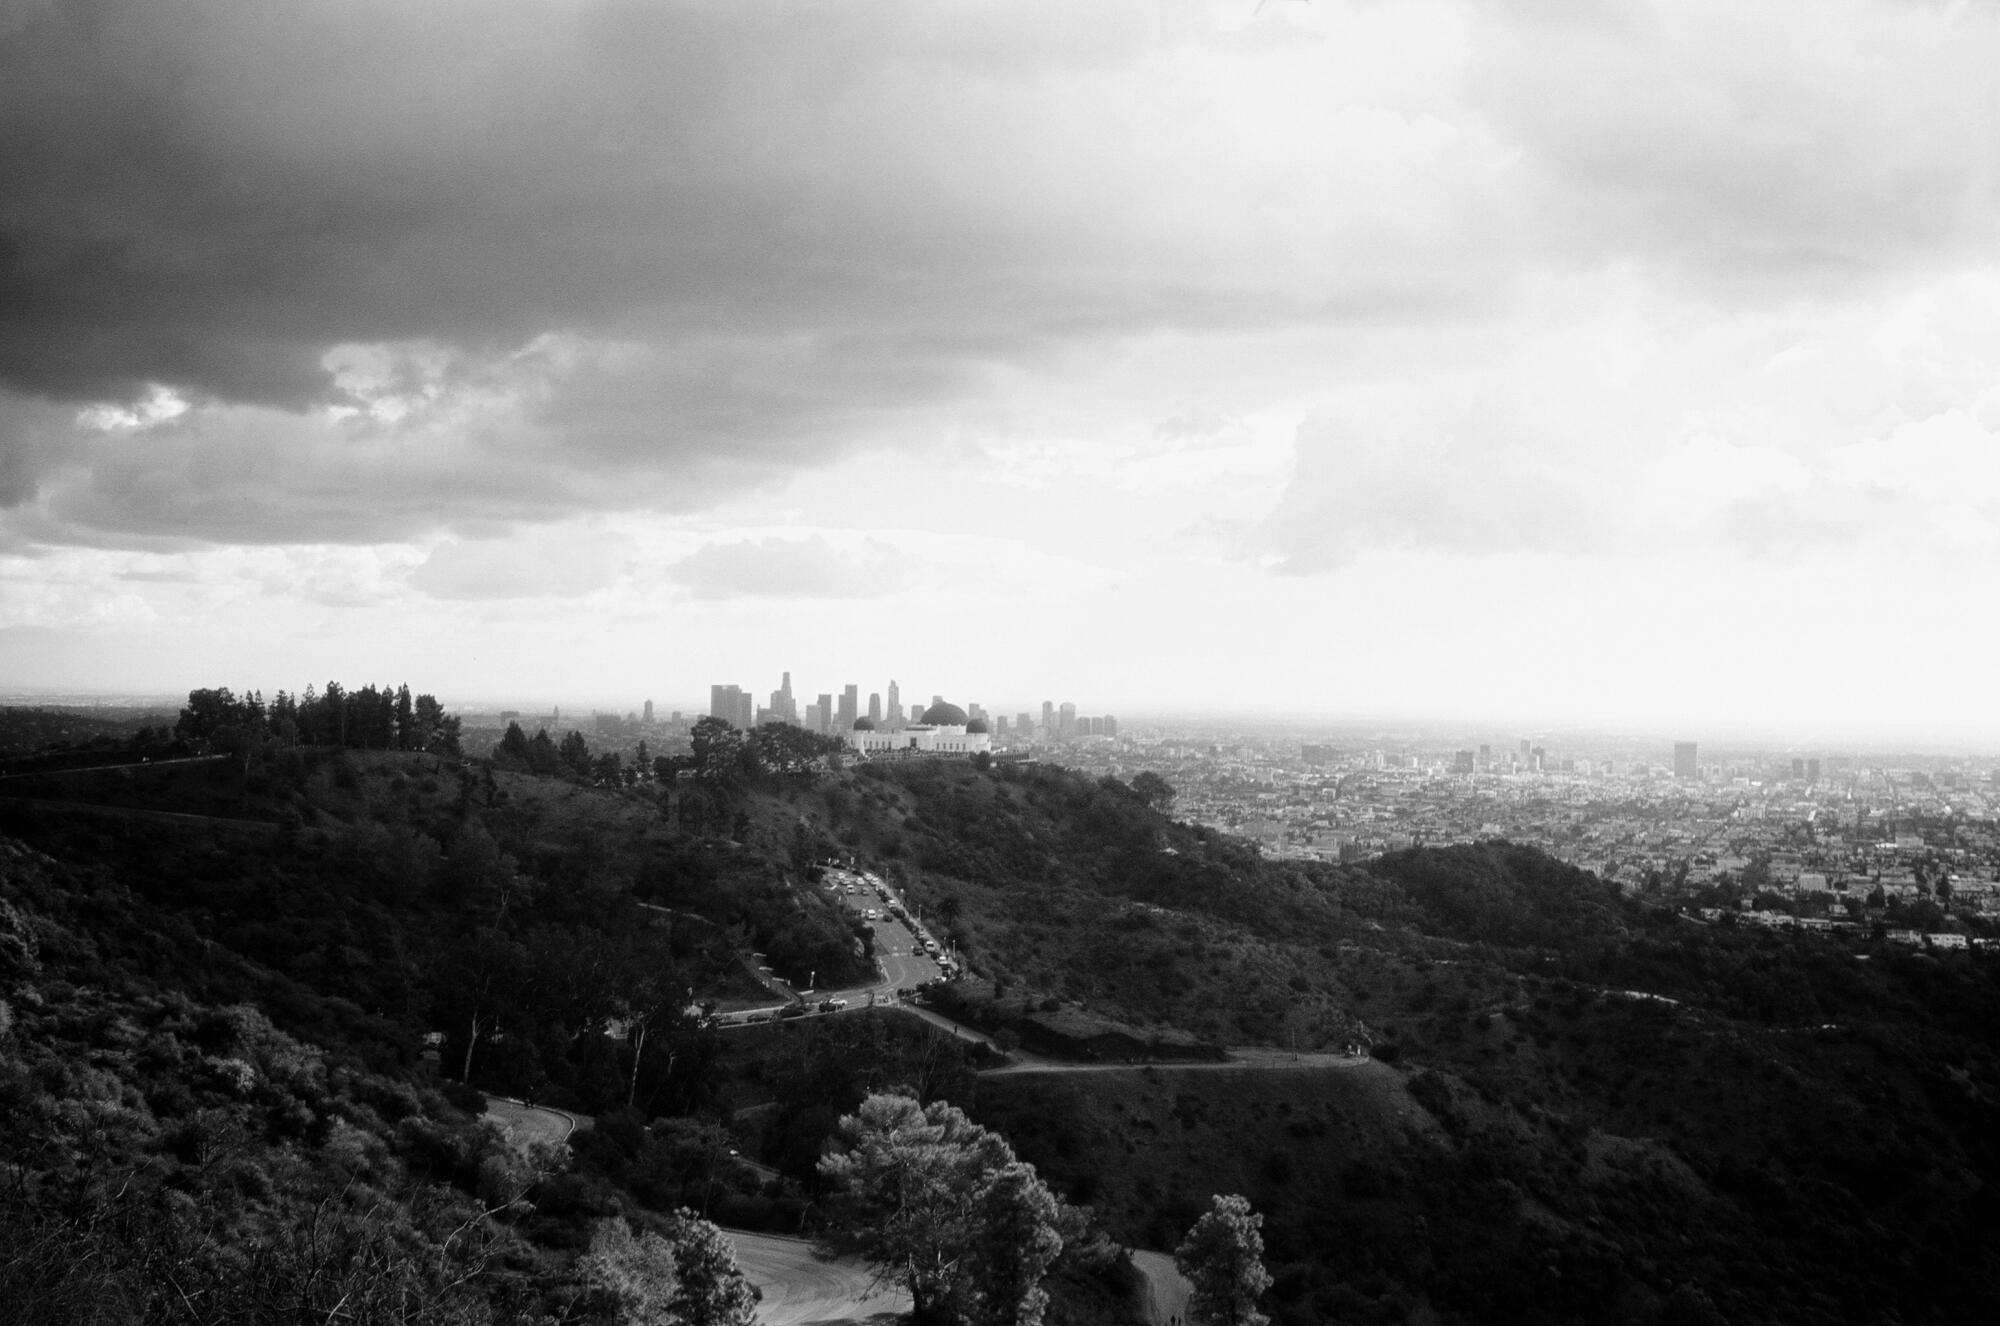 A scene from the Griffith Observatory overlooking downtown Los Angeles.